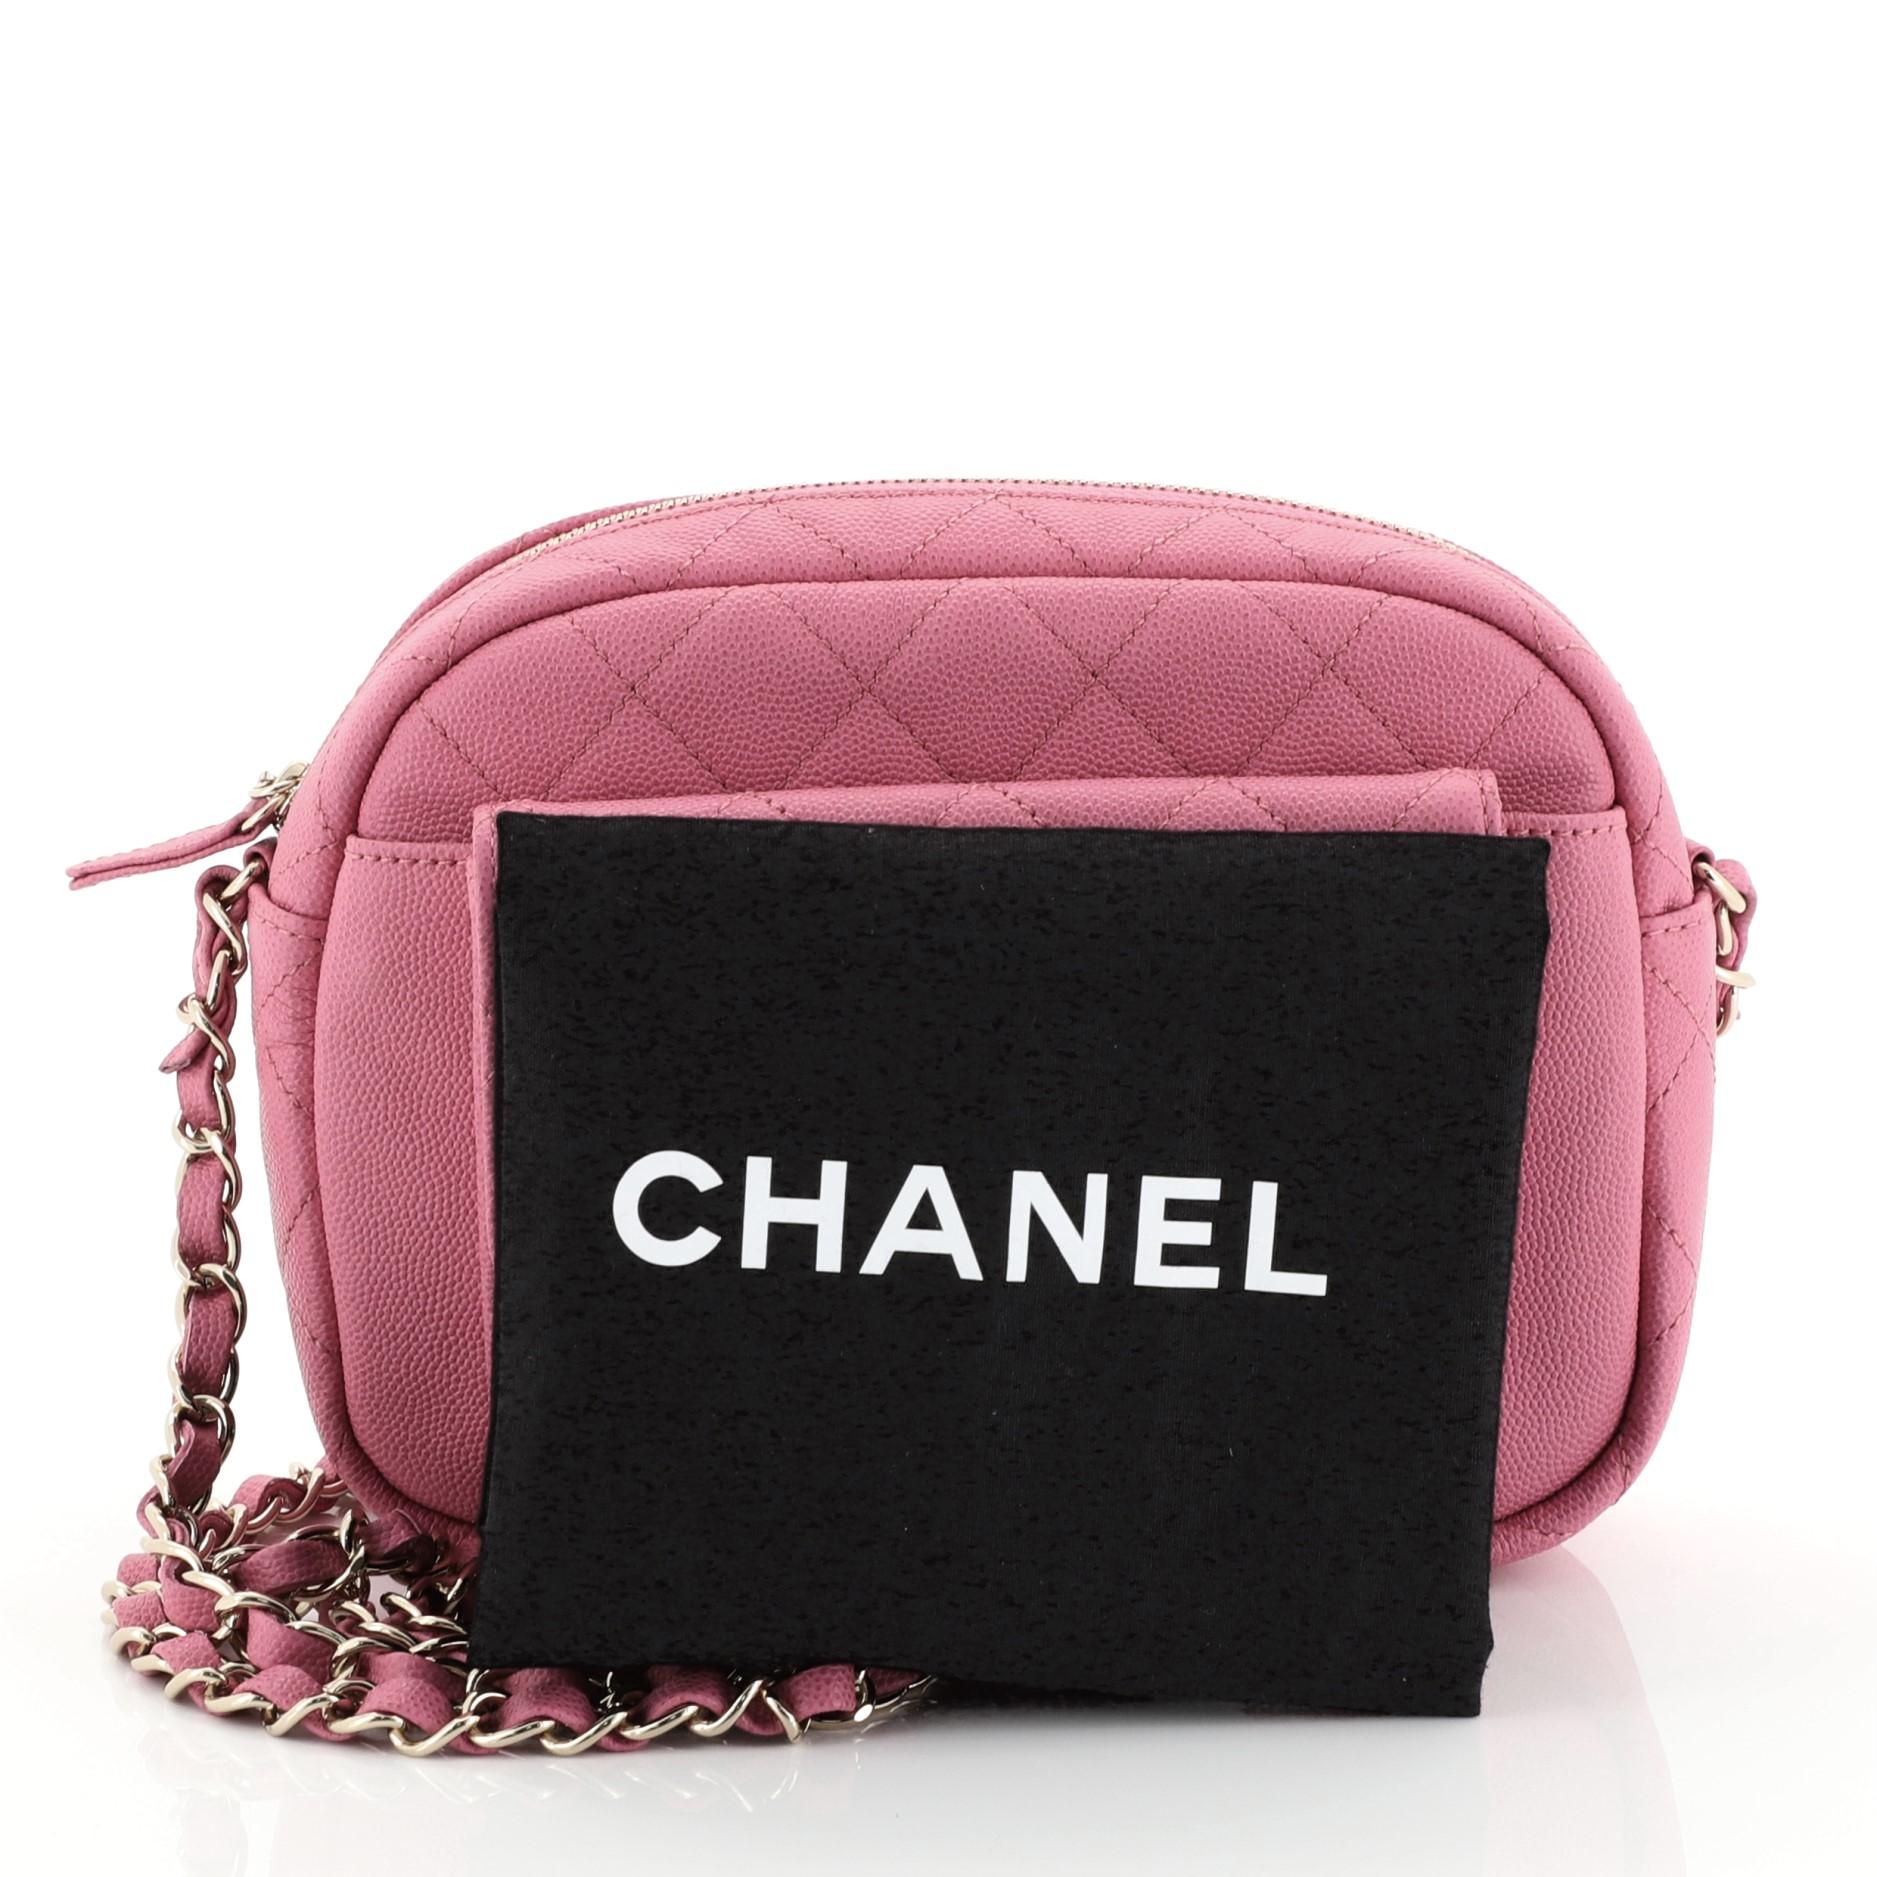 This Chanel CC Day Camera Case Quilted Caviar Medium, crafted from pink quilted caviar leather, features woven-in leather chain strap, front flap pocket with CC turn-lock closure, and gold-tone hardware. Its zip closure opens to a pink fabric